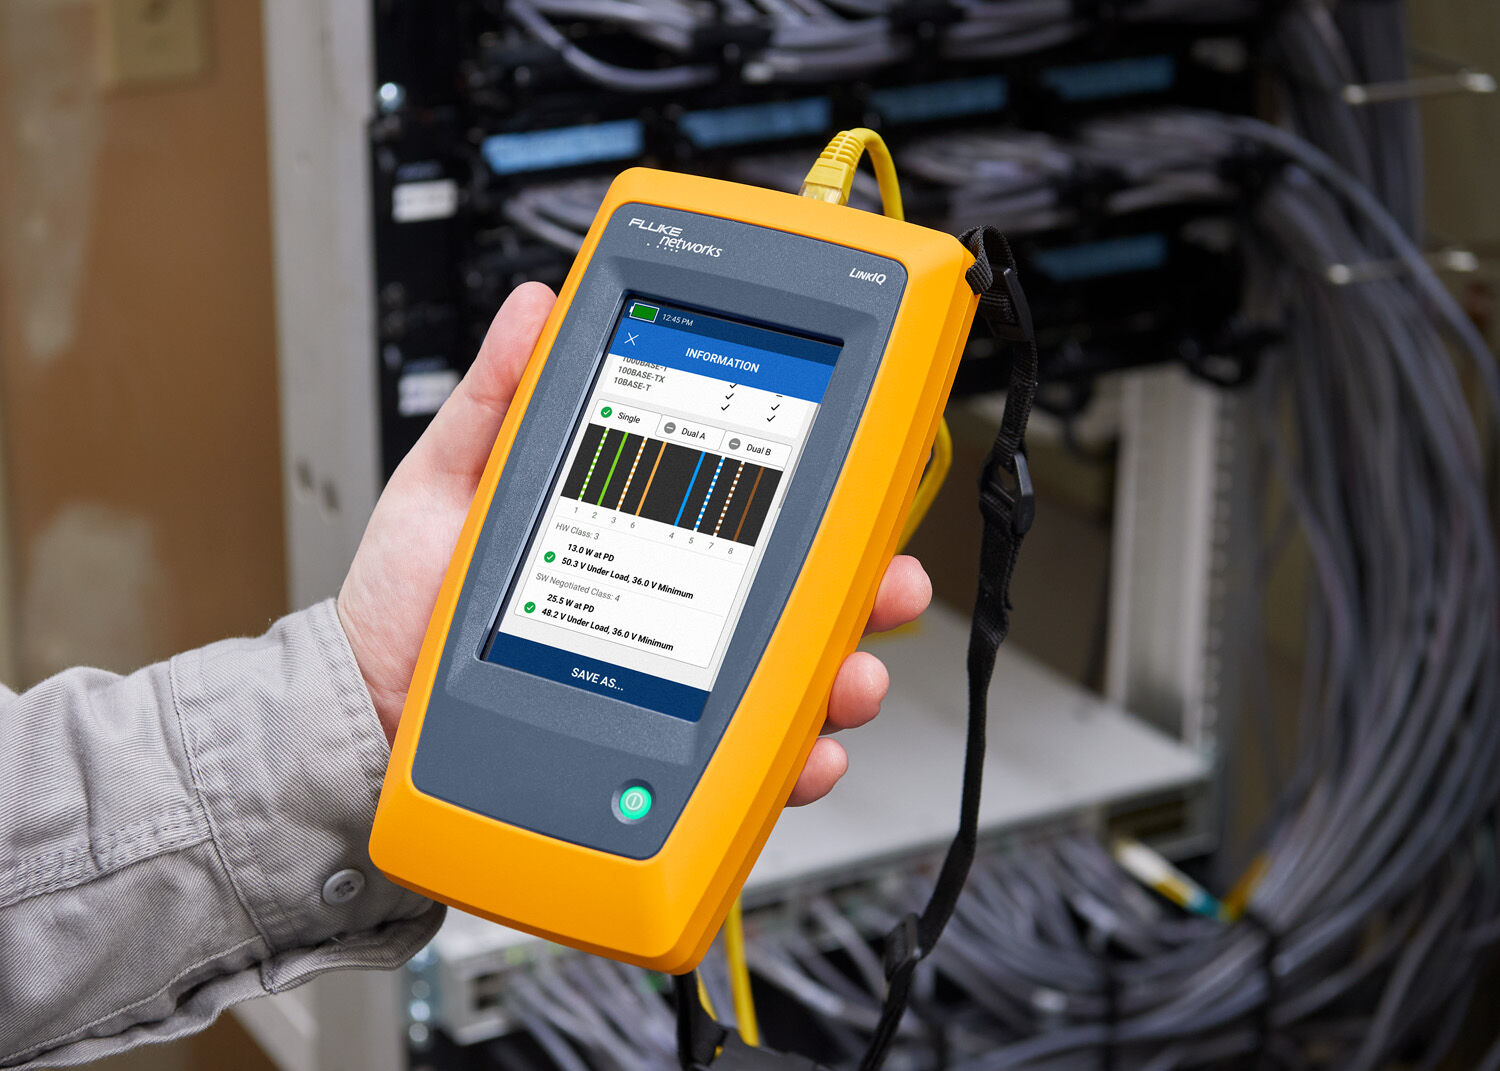 Fluke to showcase new cleantech tools and approaches for energy efficiency and safety at Light + Building